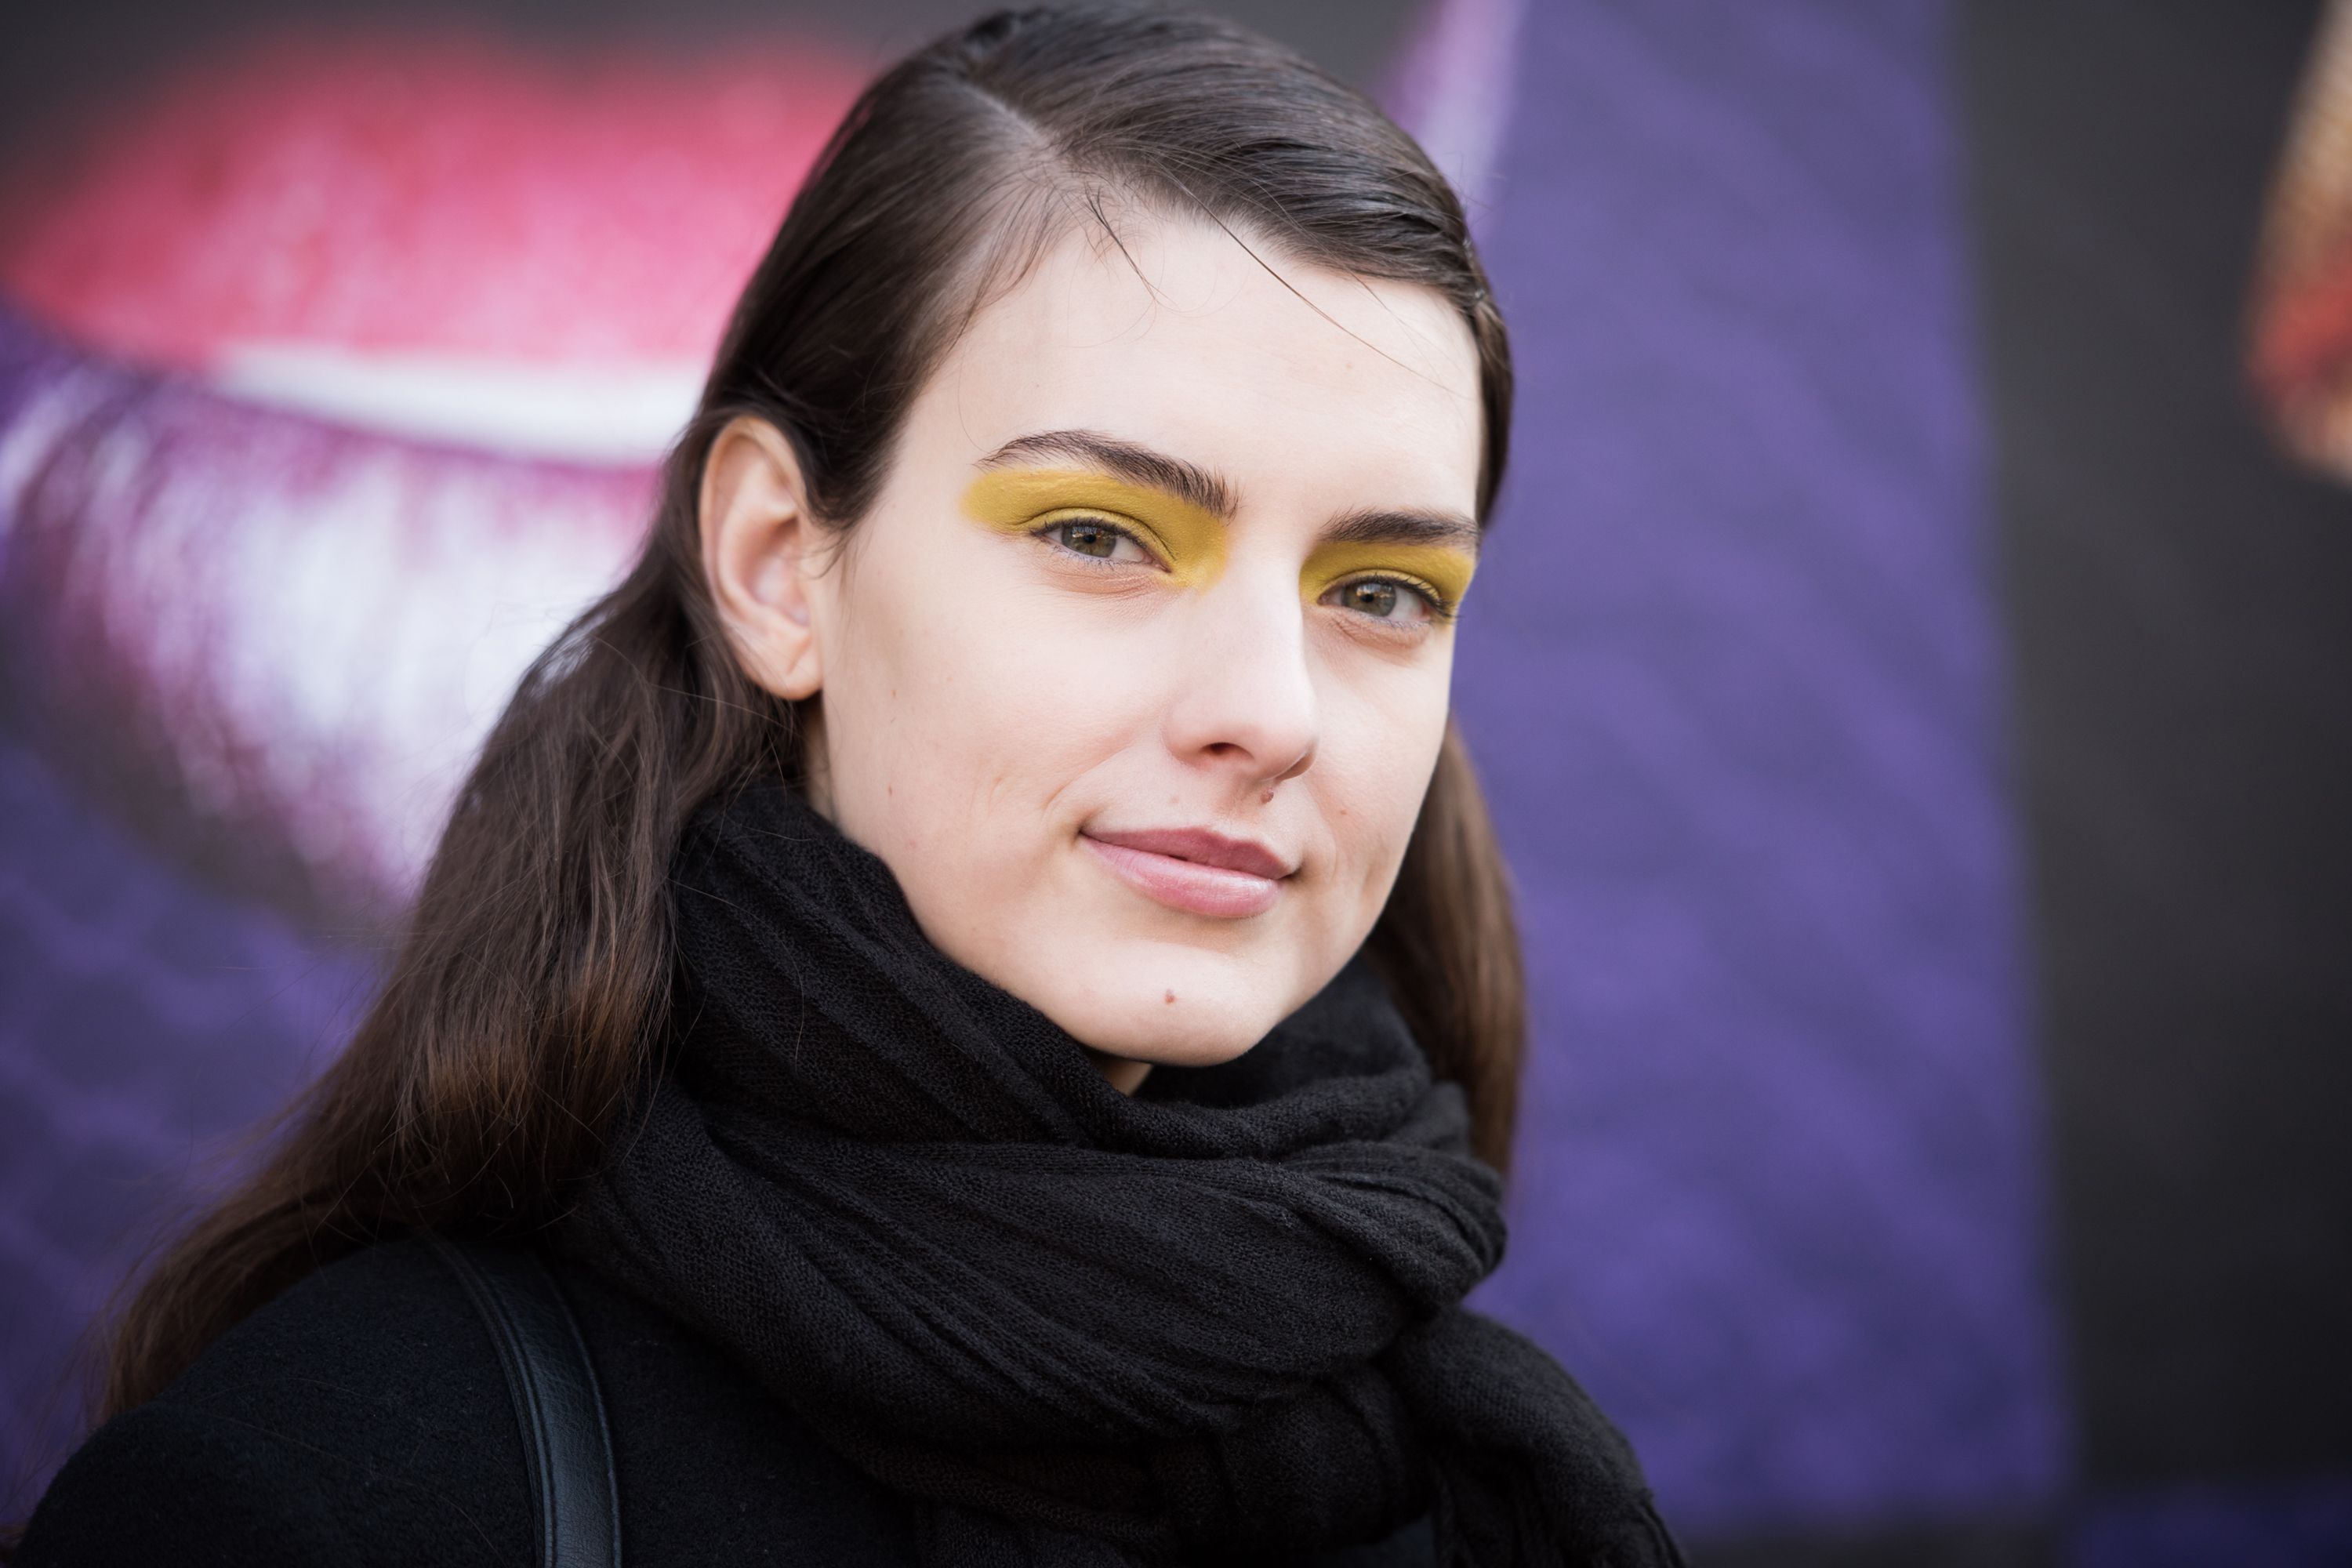 bold beauty looks are ruling nyfw street style & it’s so refreshing